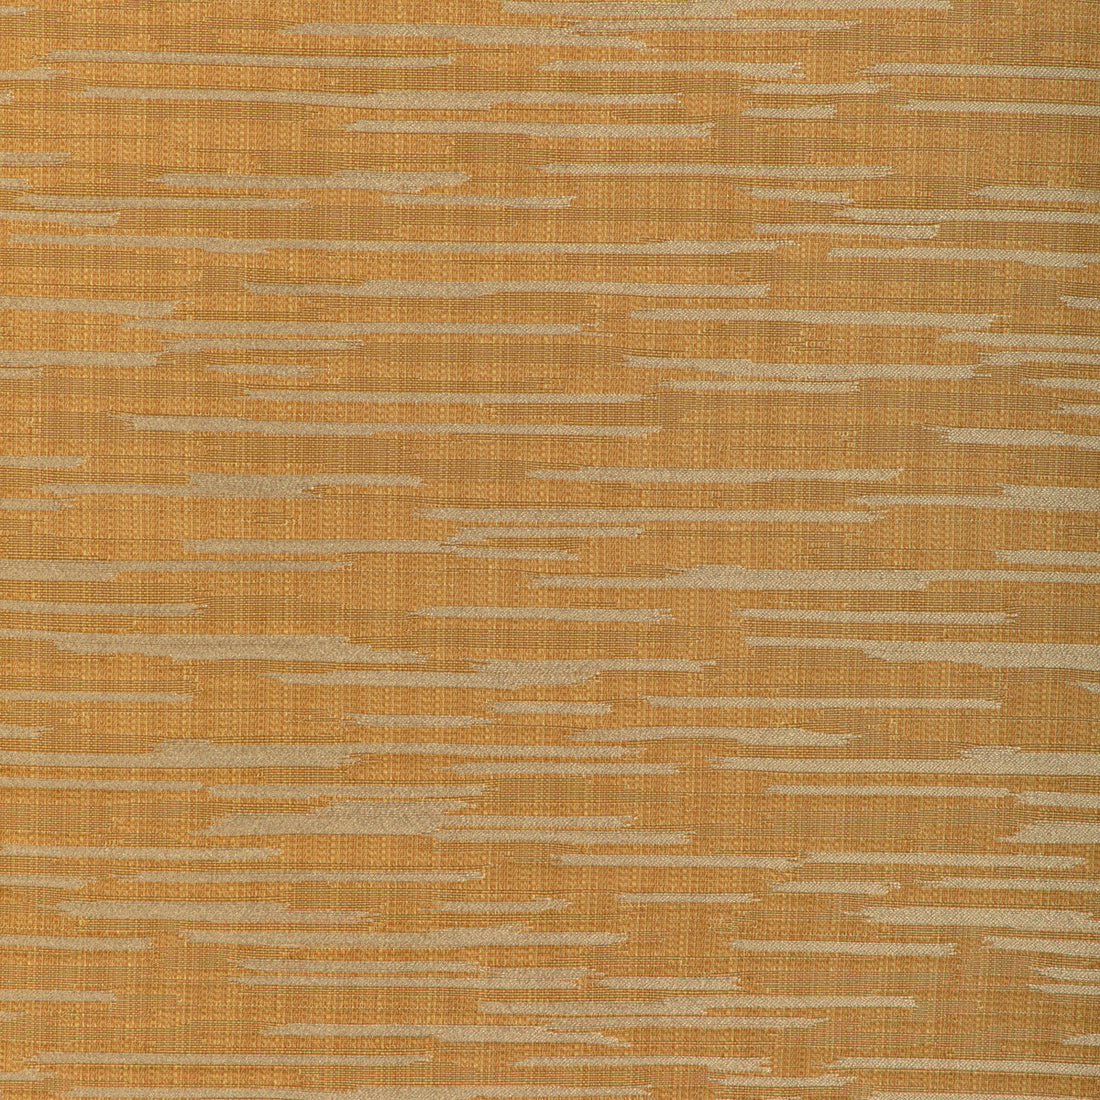 Arles Weave fabric in gold color - pattern 8023134.40.0 - by Brunschwig &amp; Fils in the Arles Weaves collection